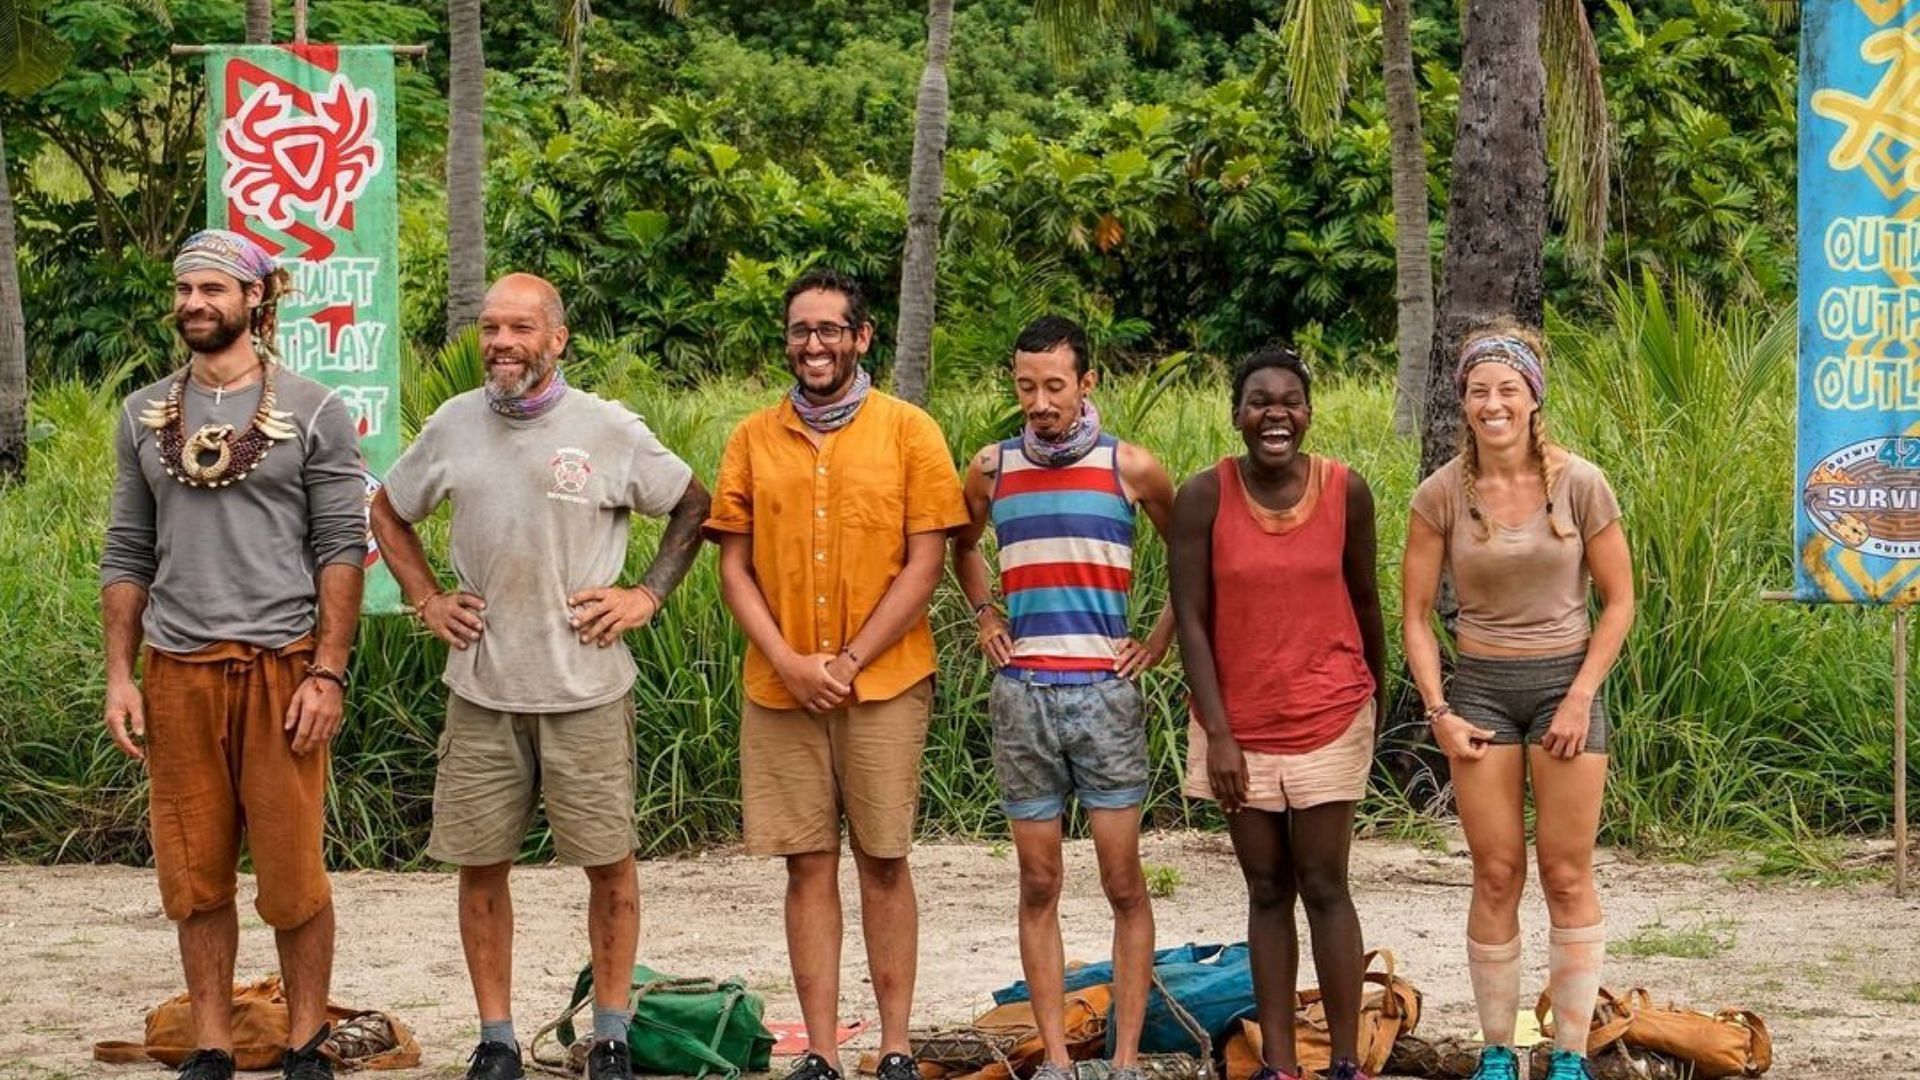 Survivor is back but without two controversial twists